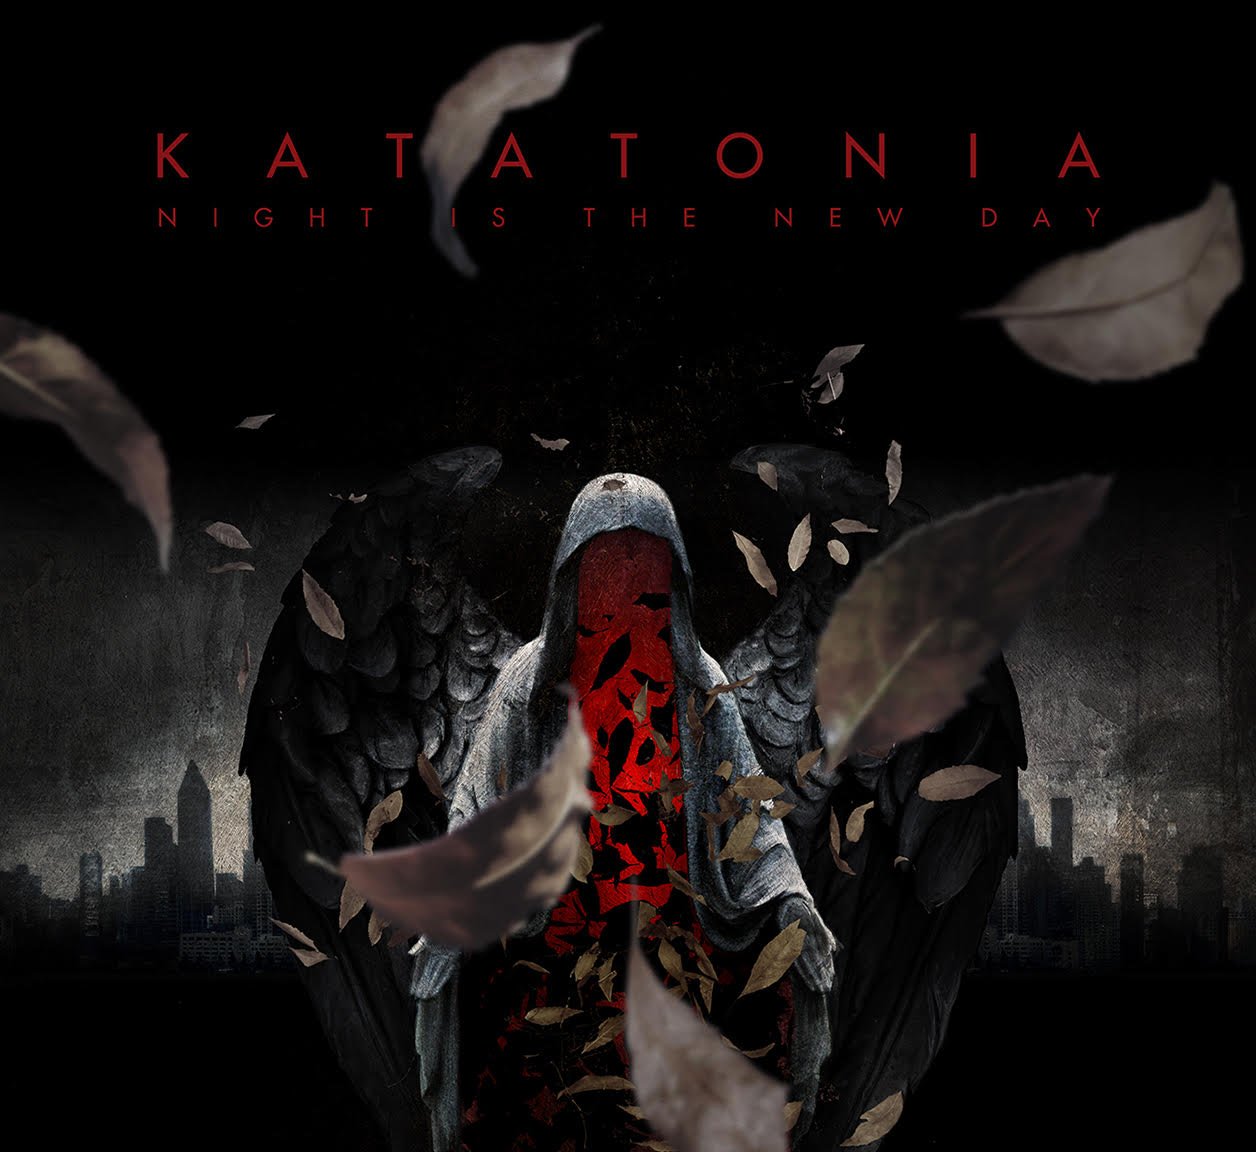 Katatonia - Night Is the New Day (Special Tour Edition) (2011) FLAC Download